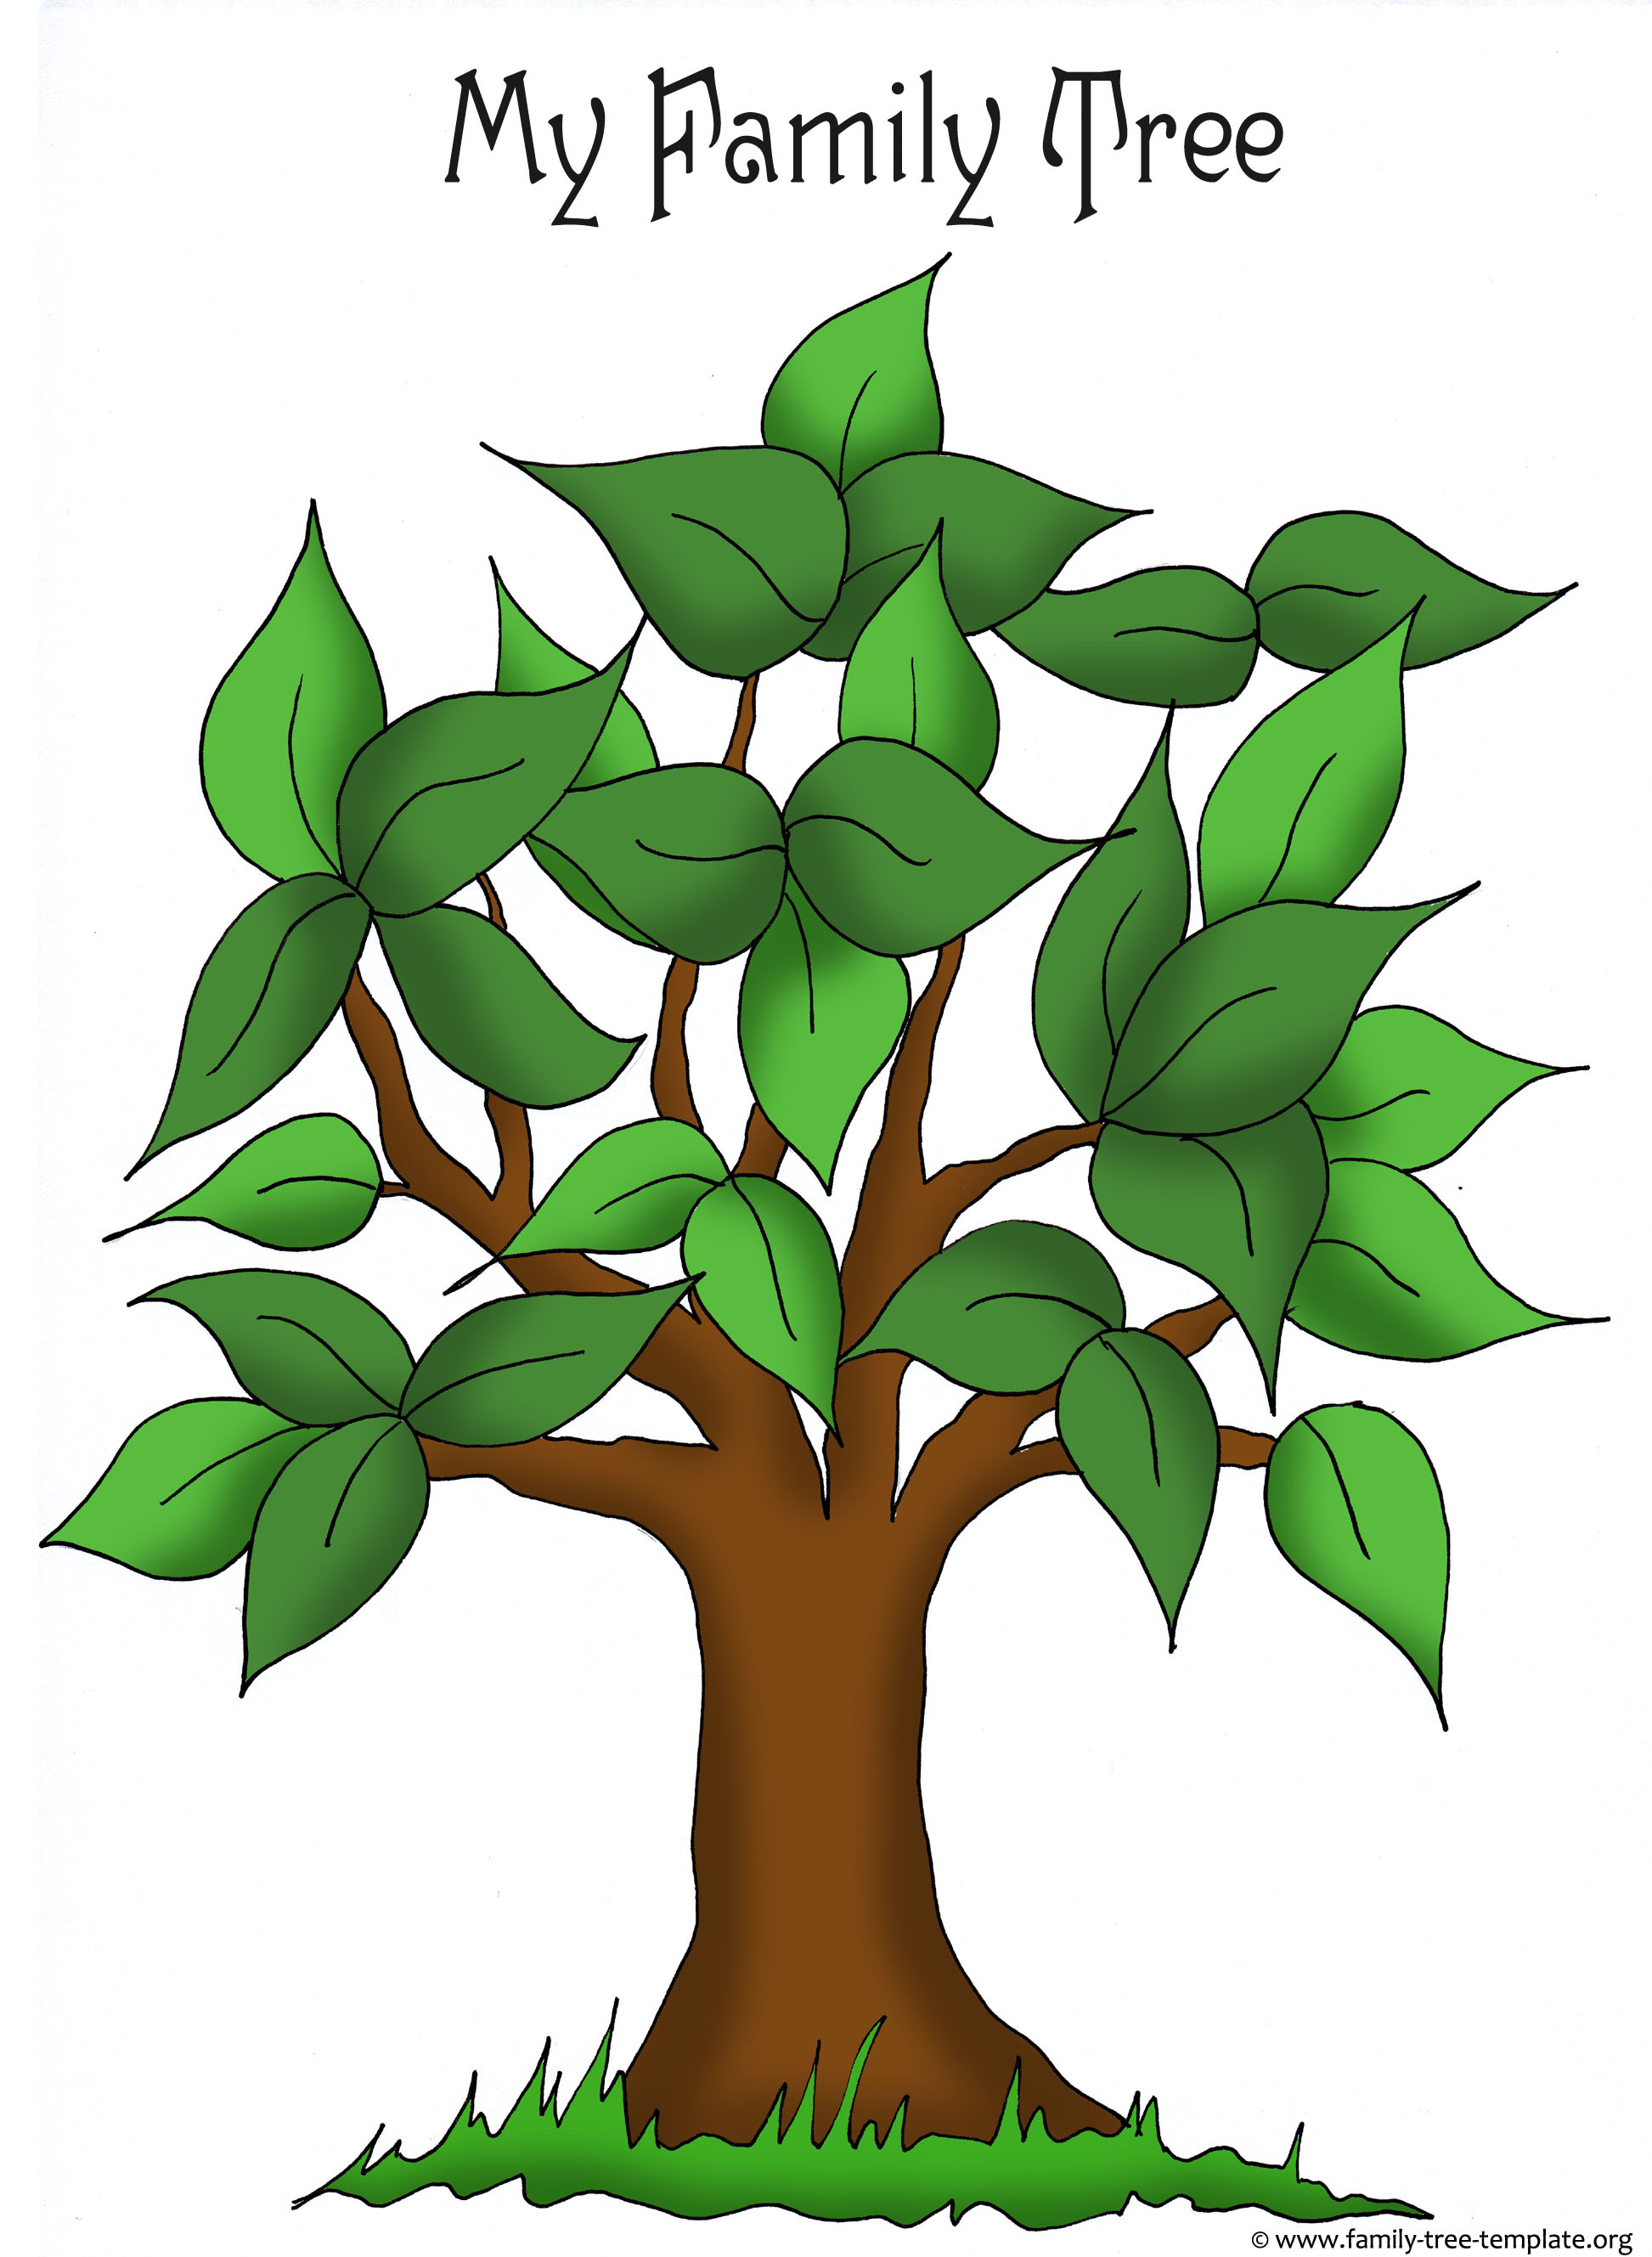 Tree Templates   Genealogy Clipart For Your Ancestry Map   Family Tree    